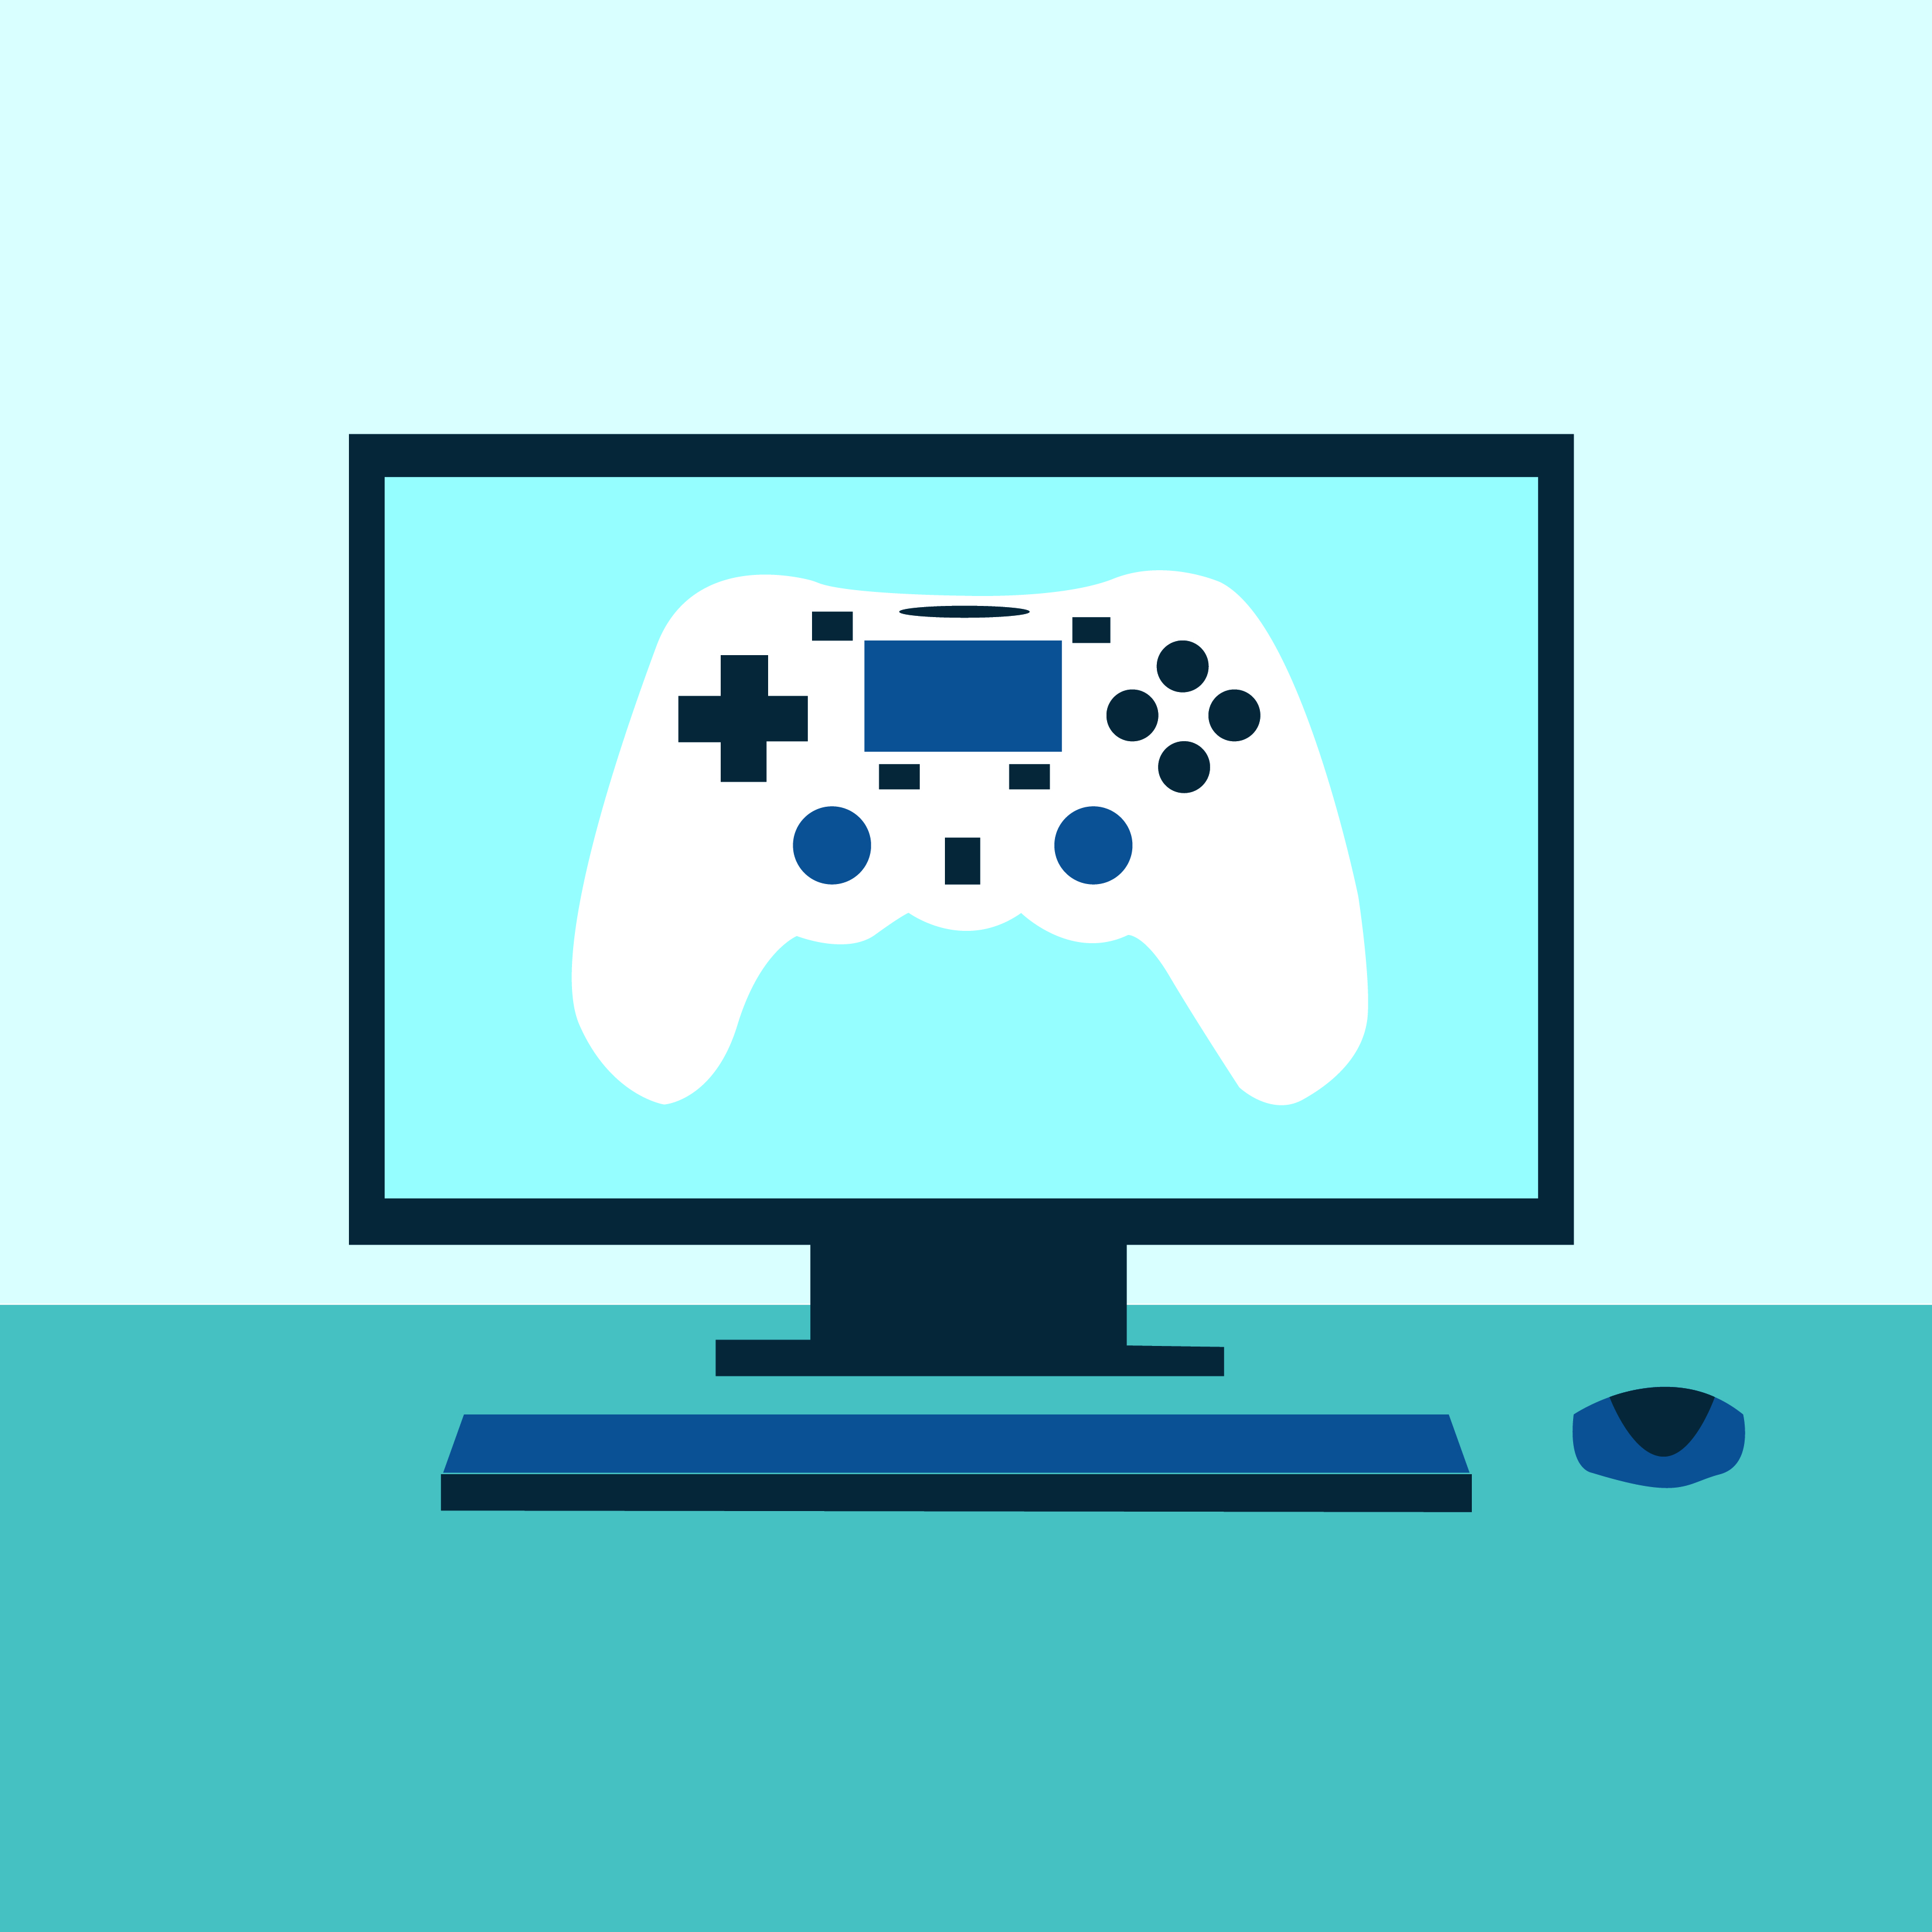 21 Free Online Game Websites That You Didn't Know About